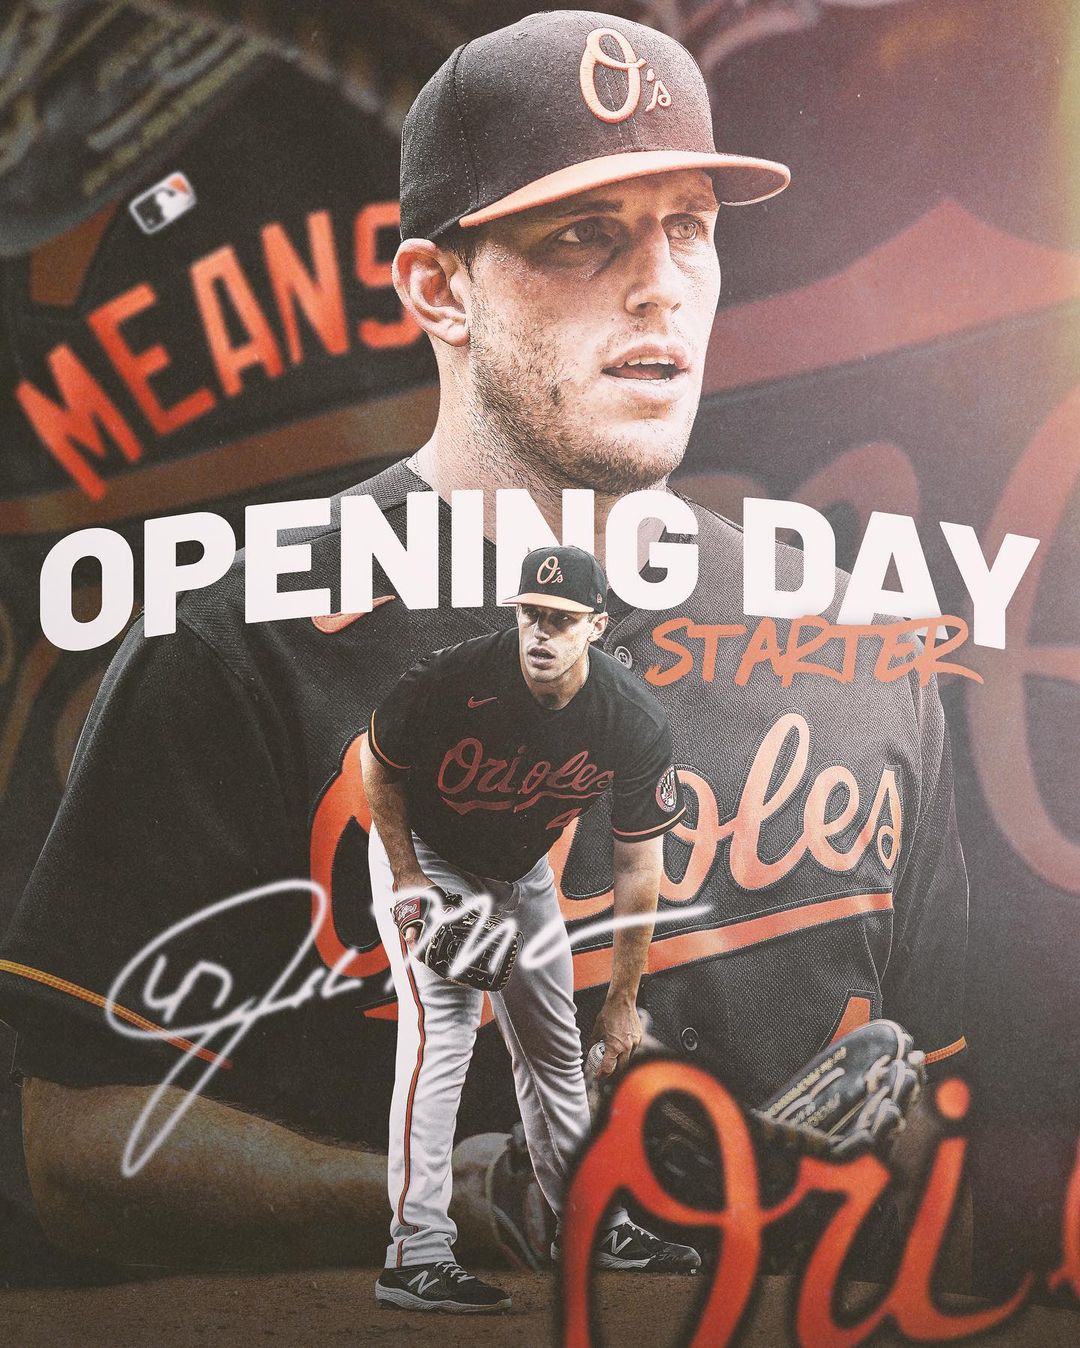 Ladies and gentlemen, your Opening Day starter, John Means....